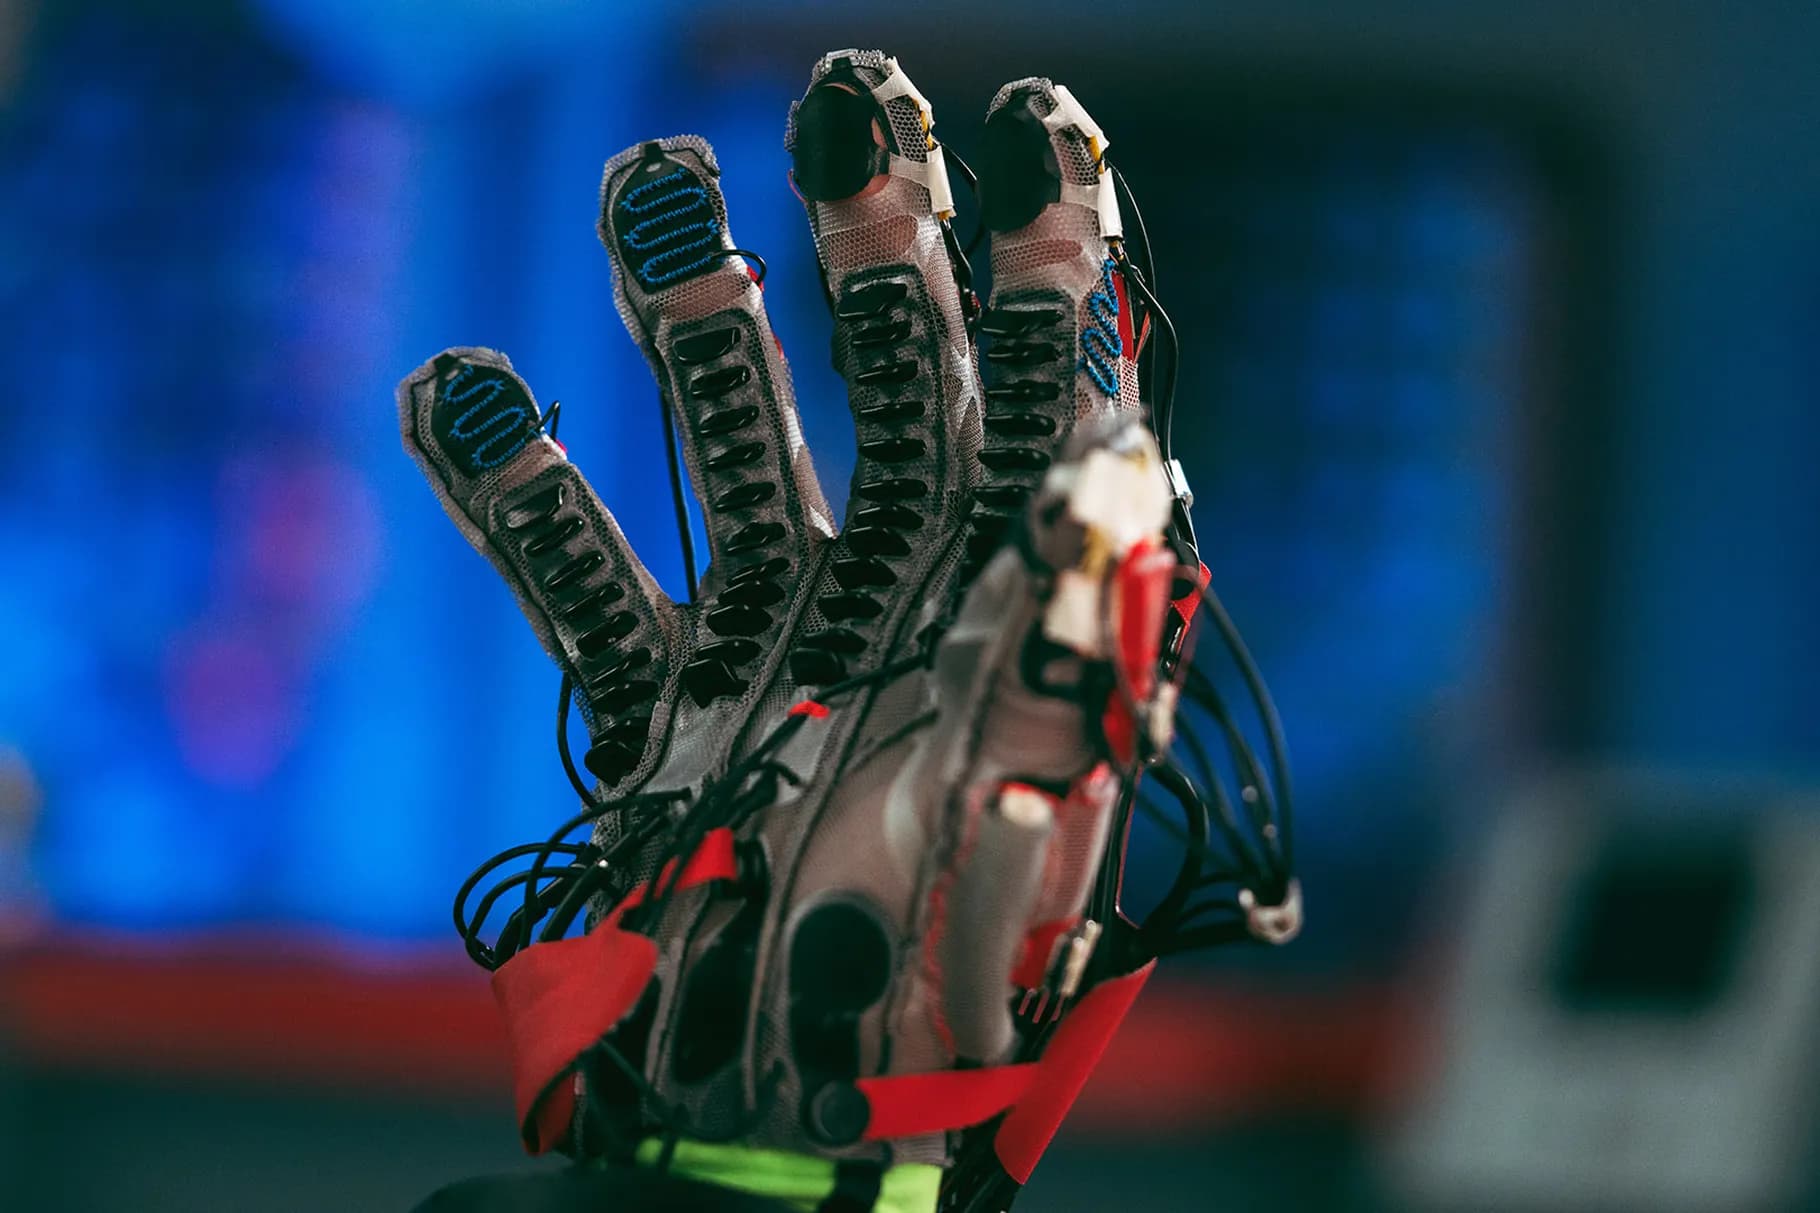 meta universe successfully developed vr touch gloves 5